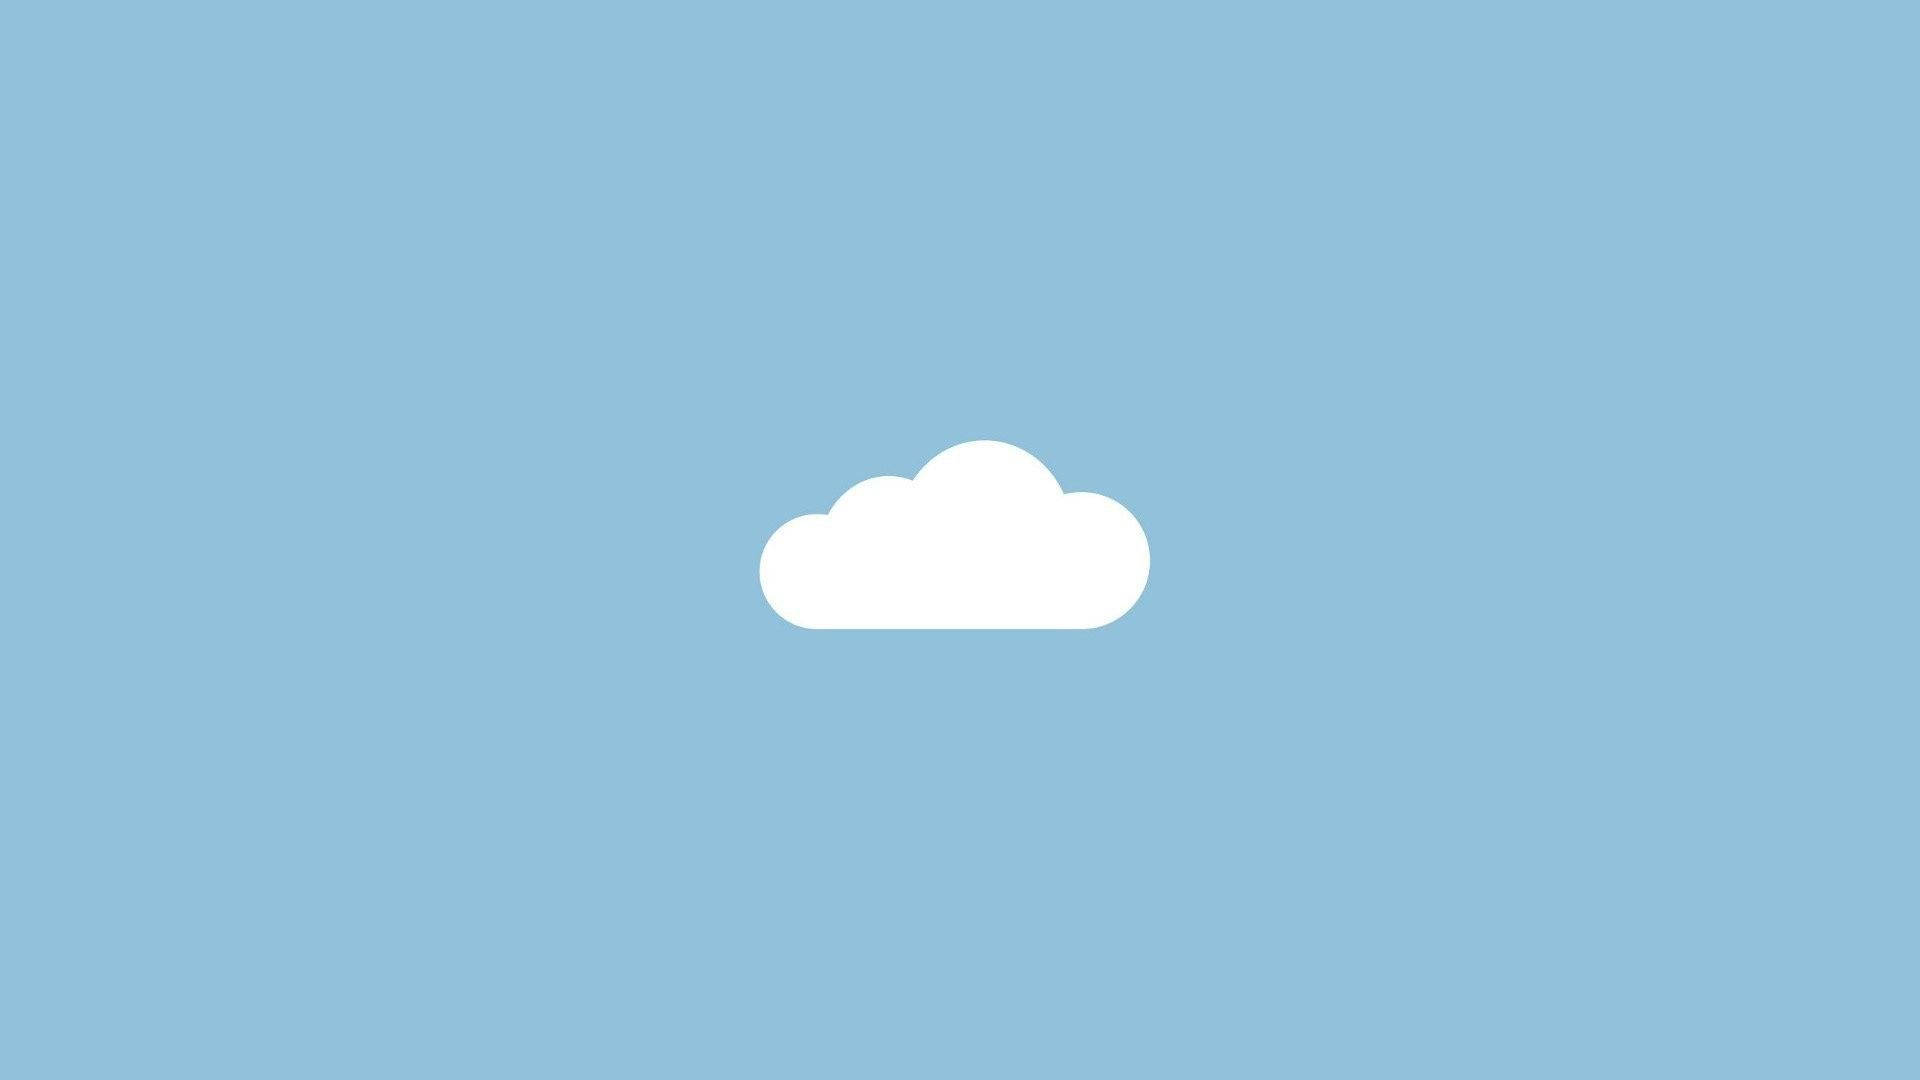 Pastel Blue With Cloud Wallpaper